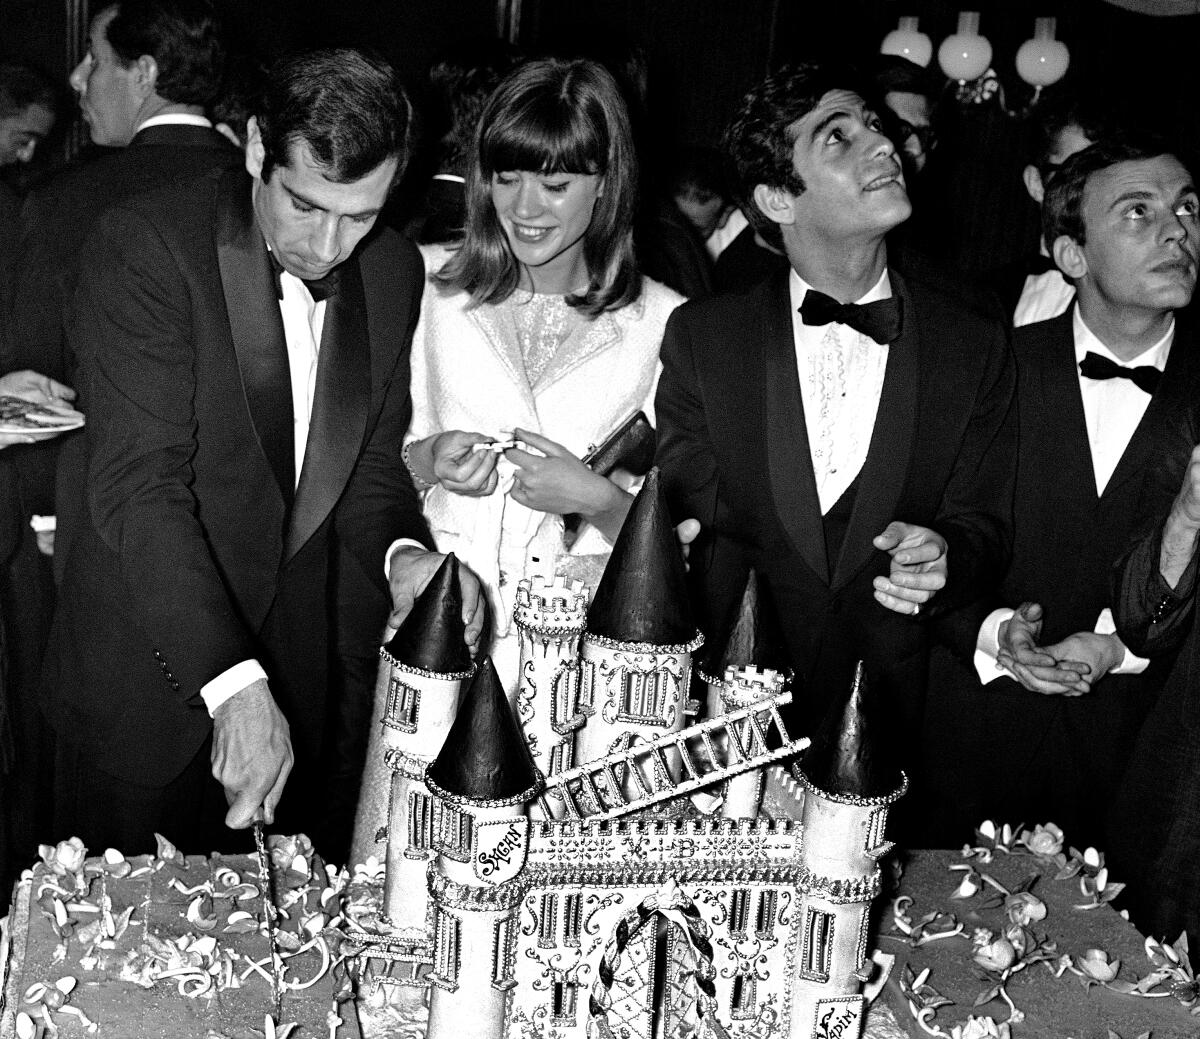 A man, standing next to a woman and two other men, cutting a large cake in the form of a castle